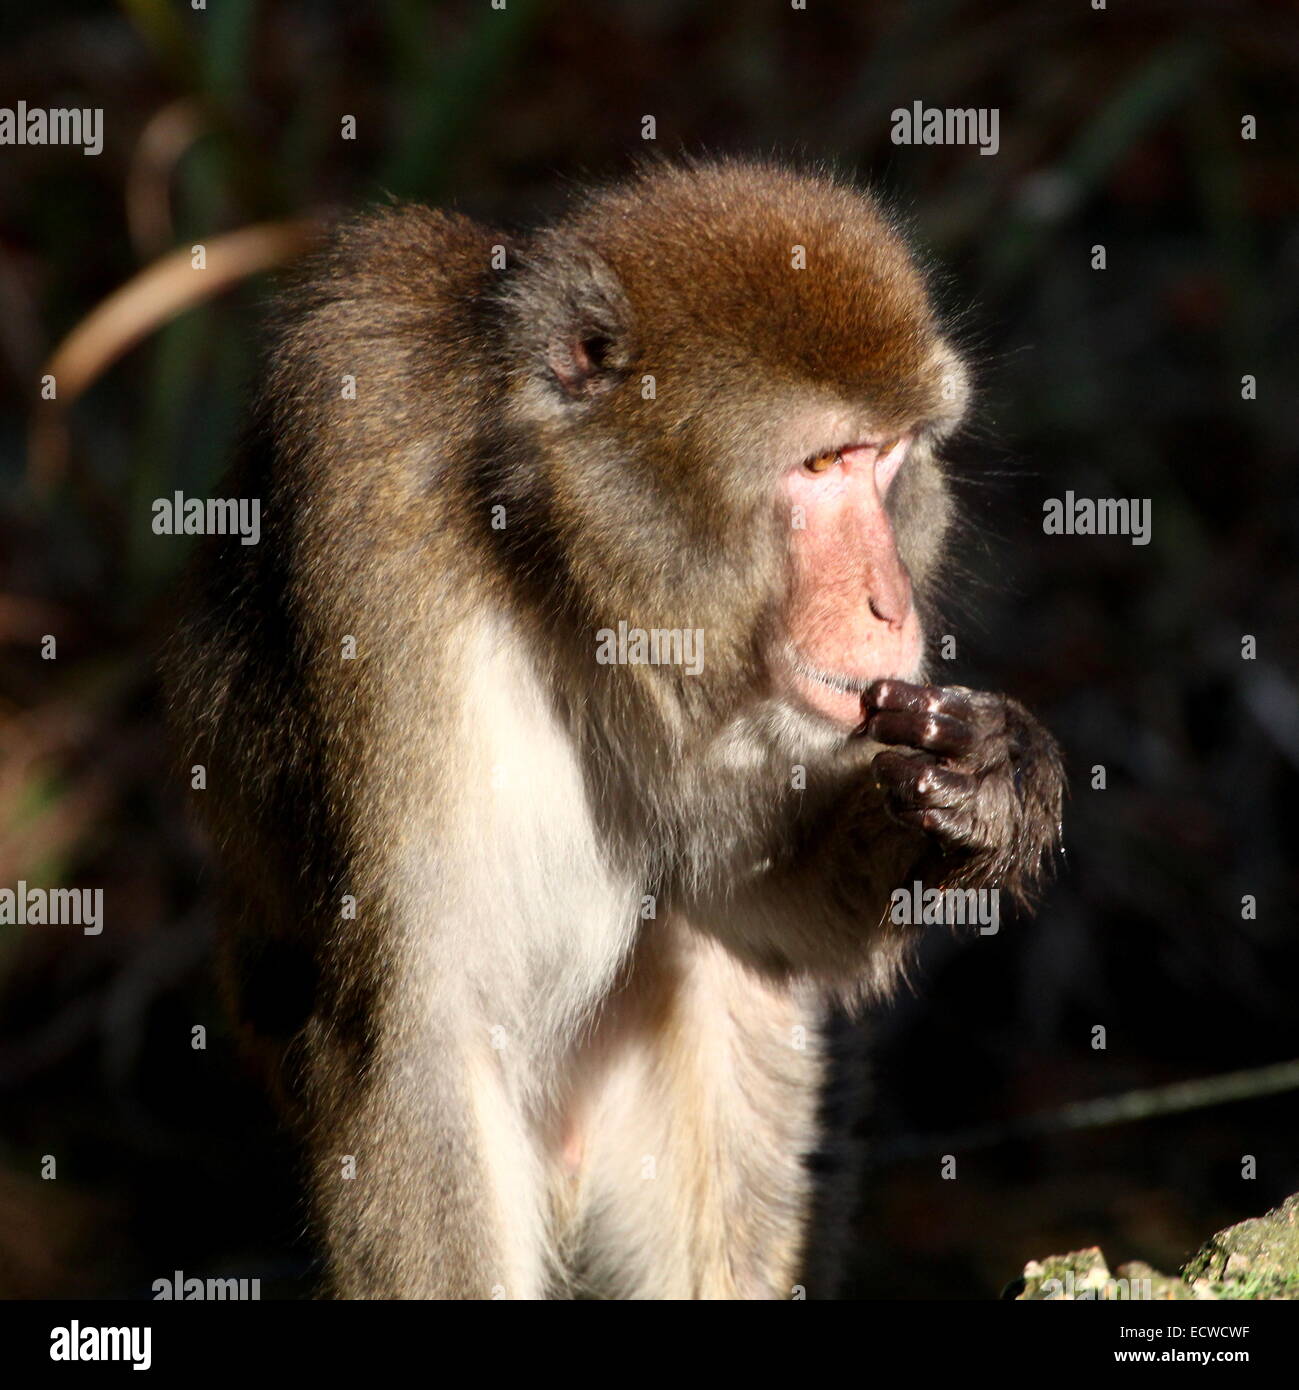 Japanese macaque or Snow monkey (Macaca fuscata) close-up while eating Stock Photo